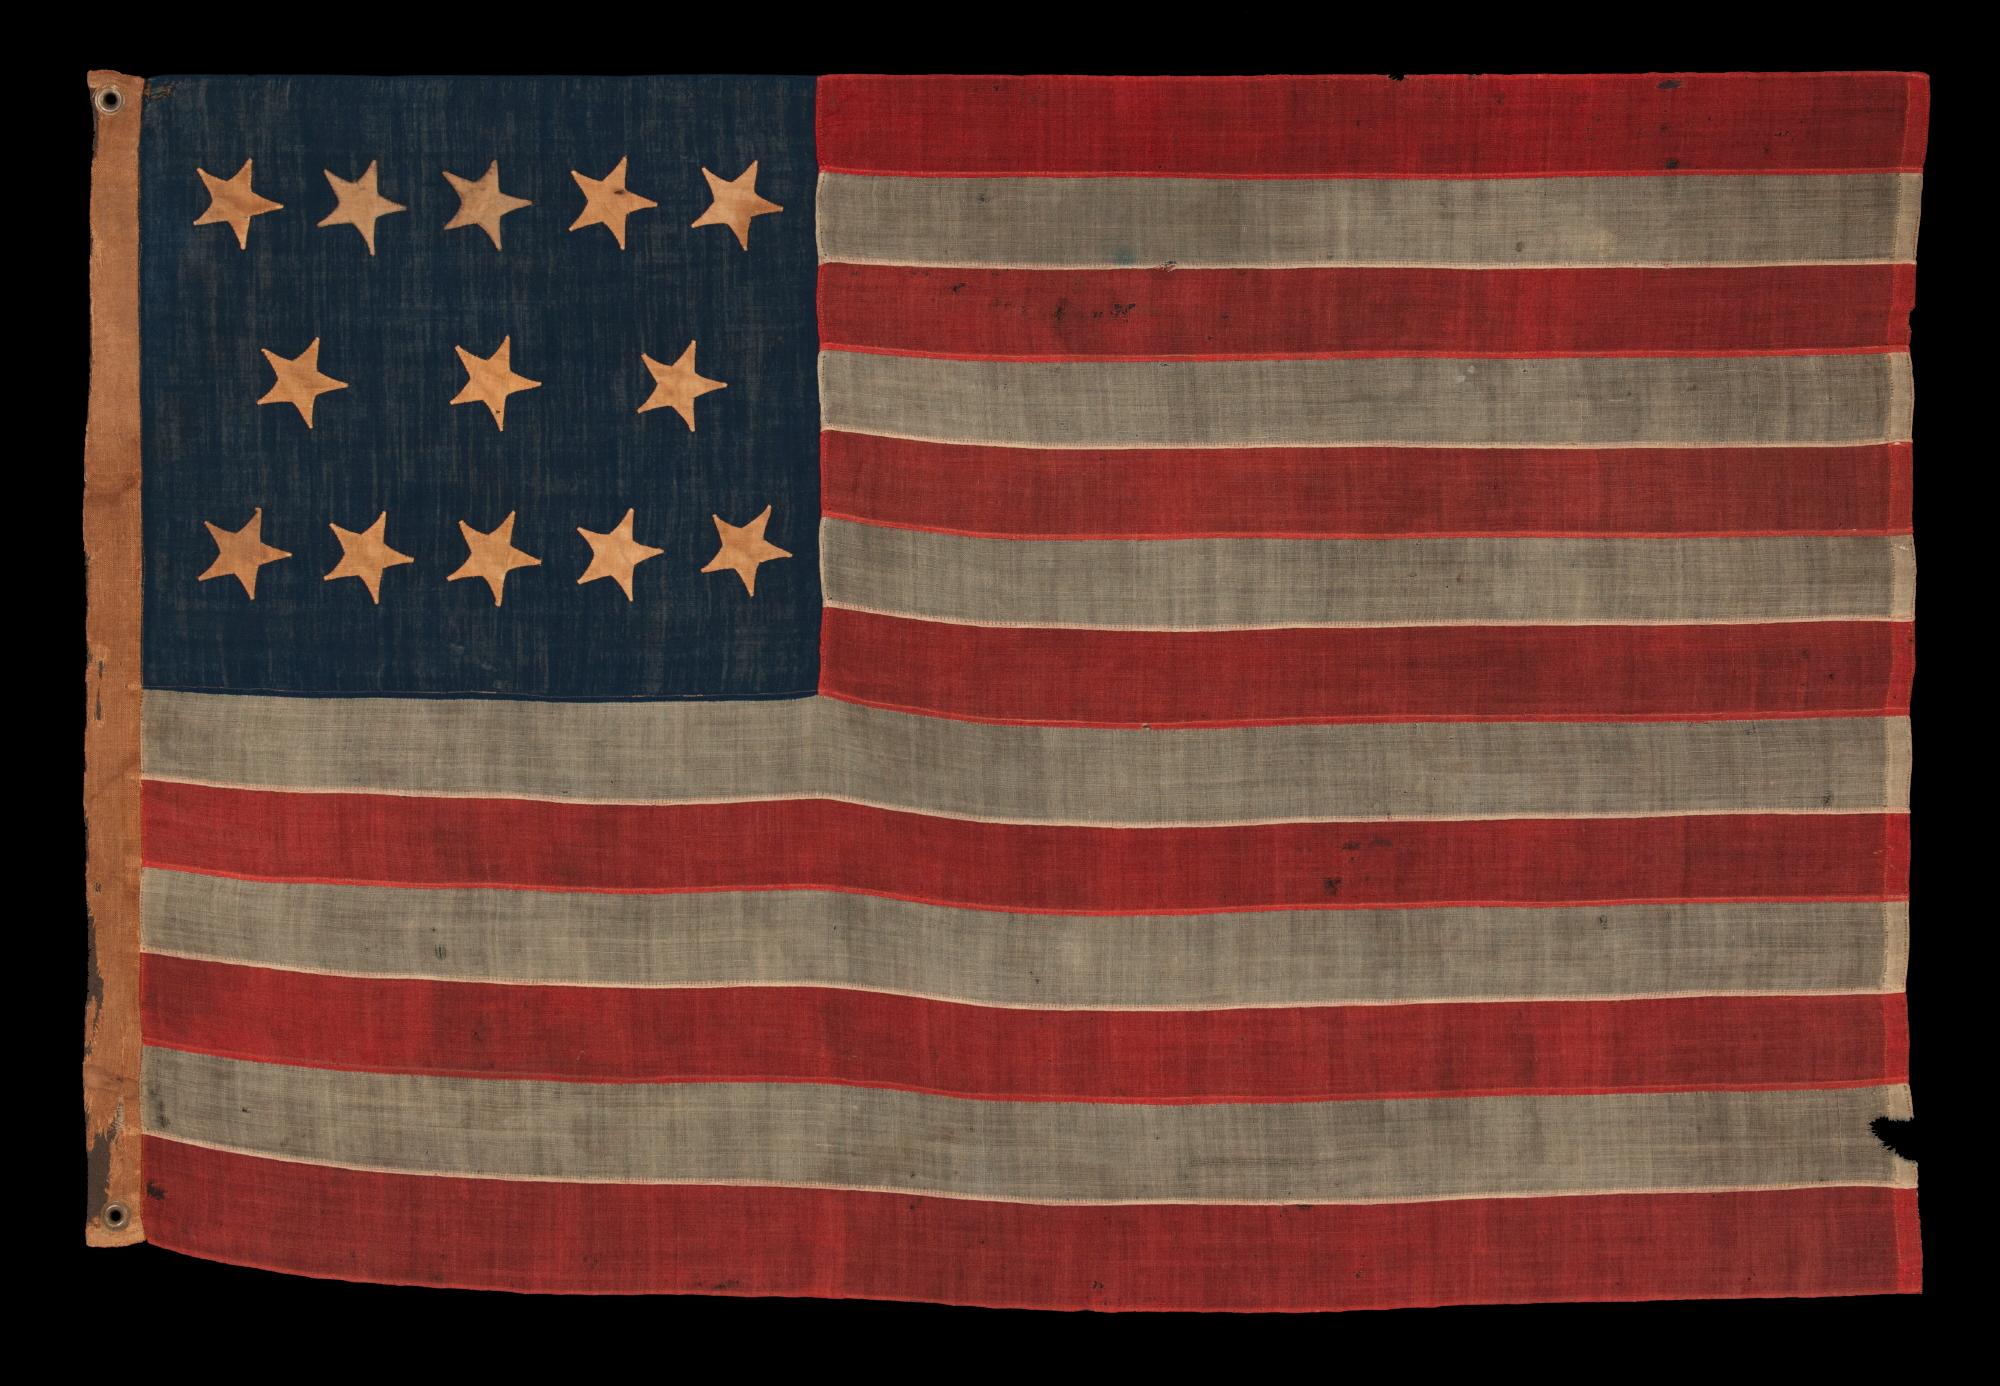 Antique American flag with 13 hand-sewn stars in an extremely rare lineal configuration of 5-3-5, probably made with the intent of use by local militia or private outfitting of a volunteer company, civil war period, 1861-1865

We have made 13 star